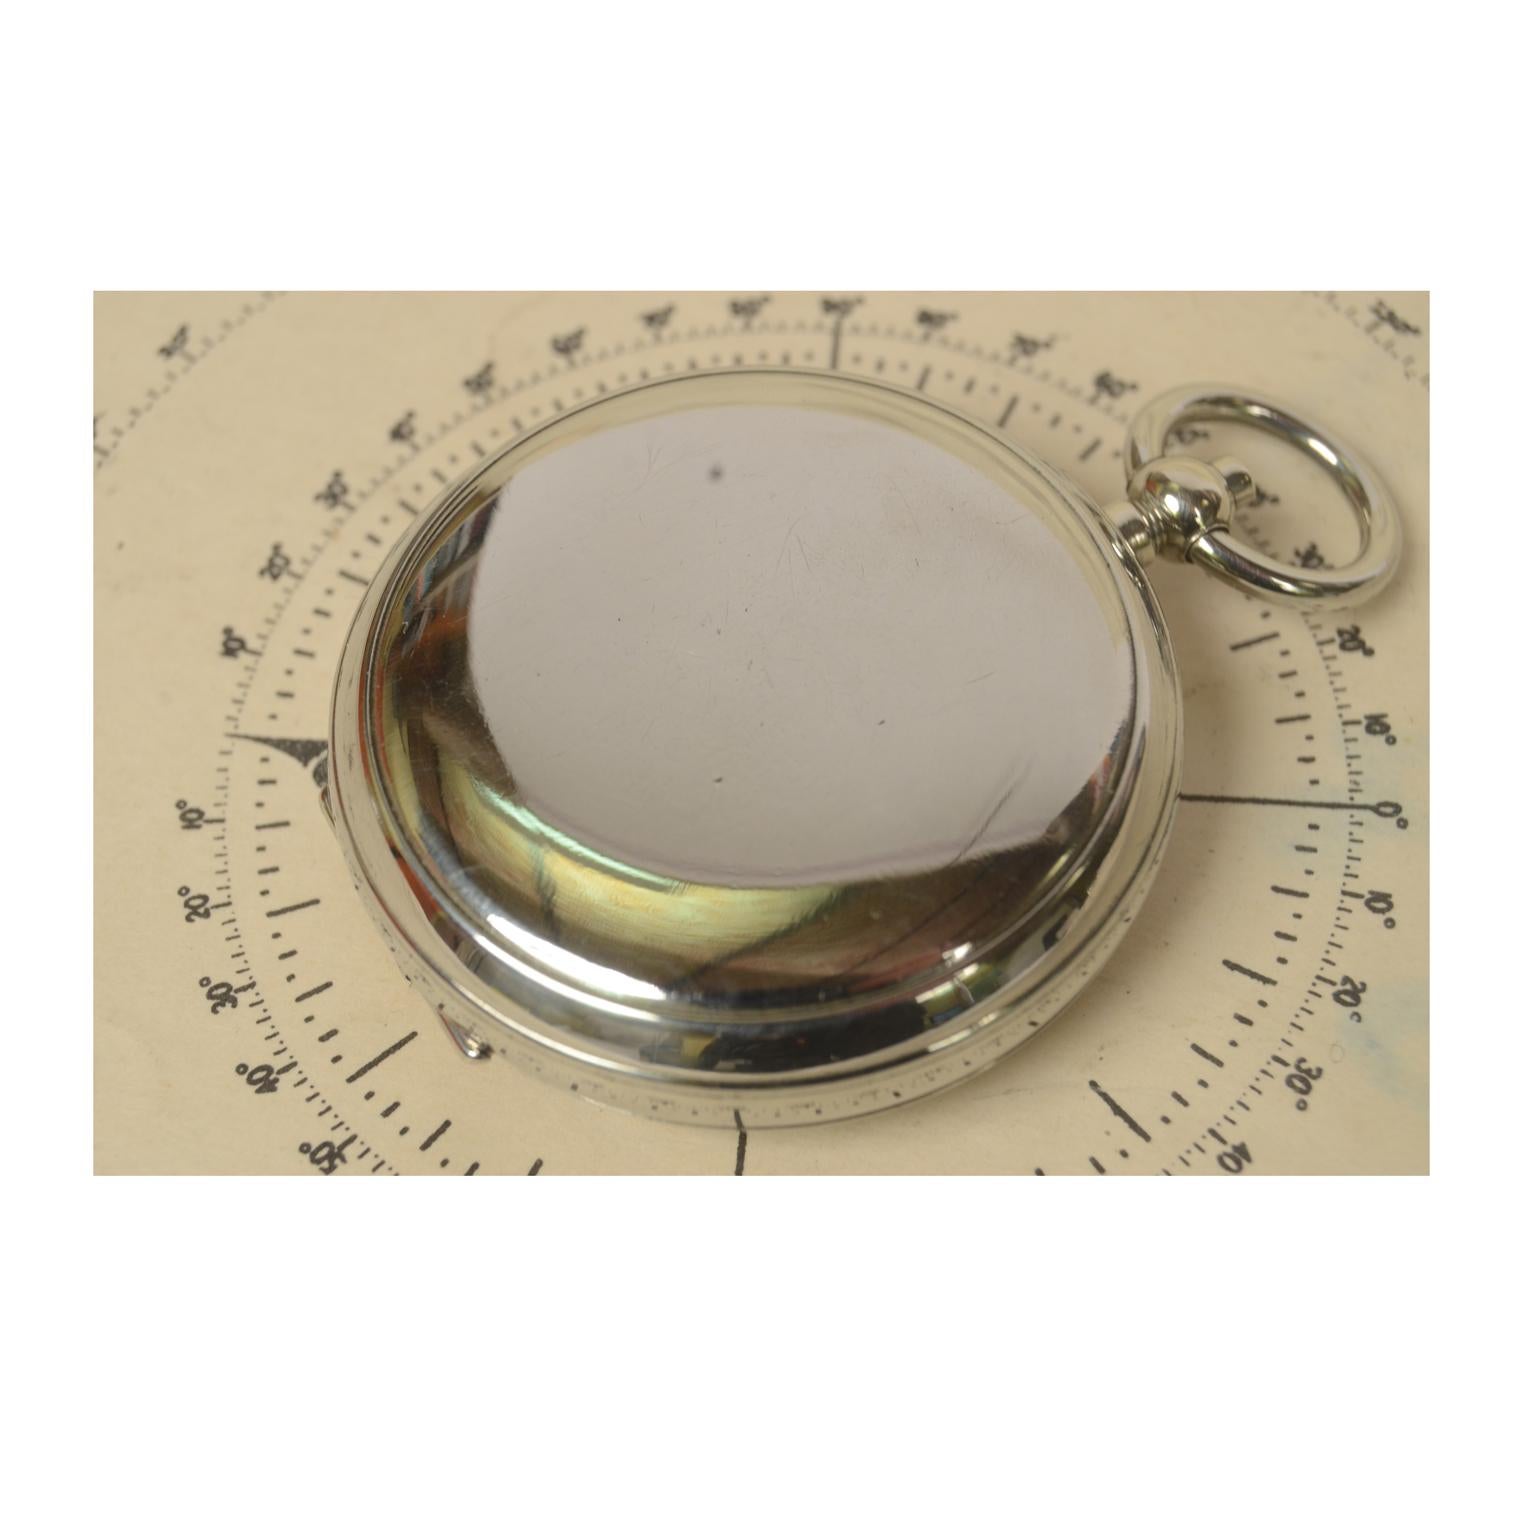 Pocket Compass Used by British Aviation Officers, 1917 1